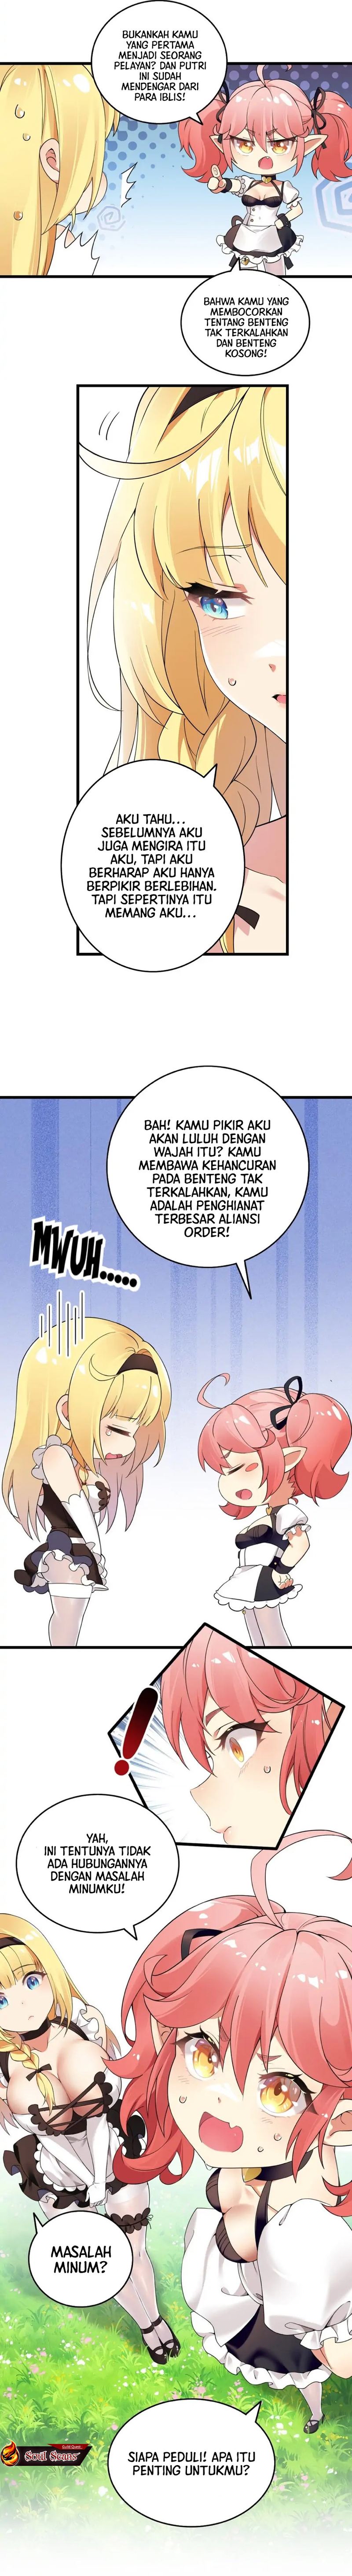 Holy Maiden, Please Stop You Weird Thought In Your Brain! Chapter 10